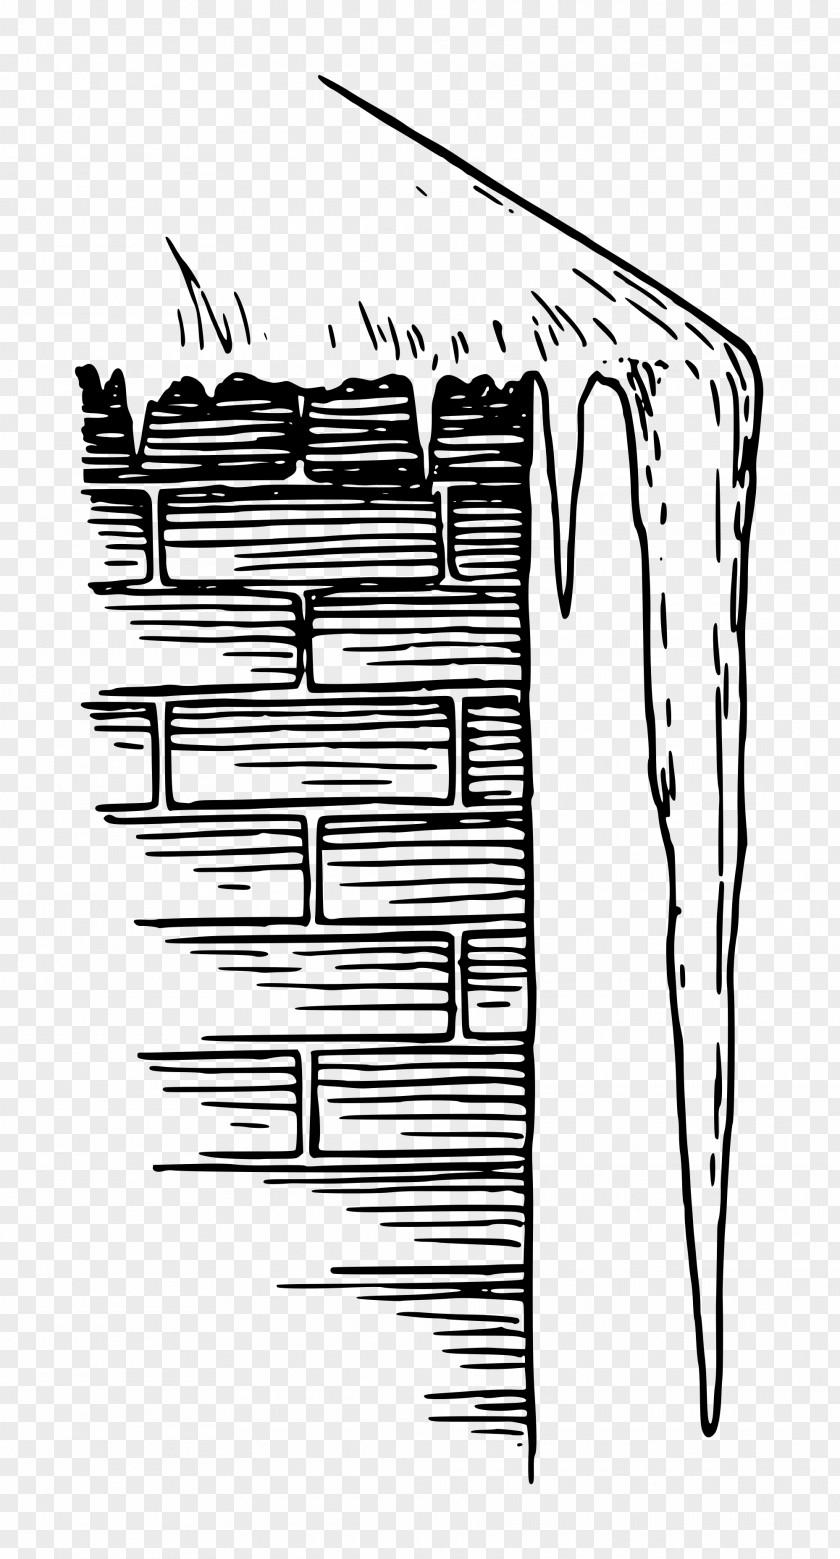 Black Hole Drawing Sedimentary Rocks Coloring Book Icicle Clip Art Line PNG